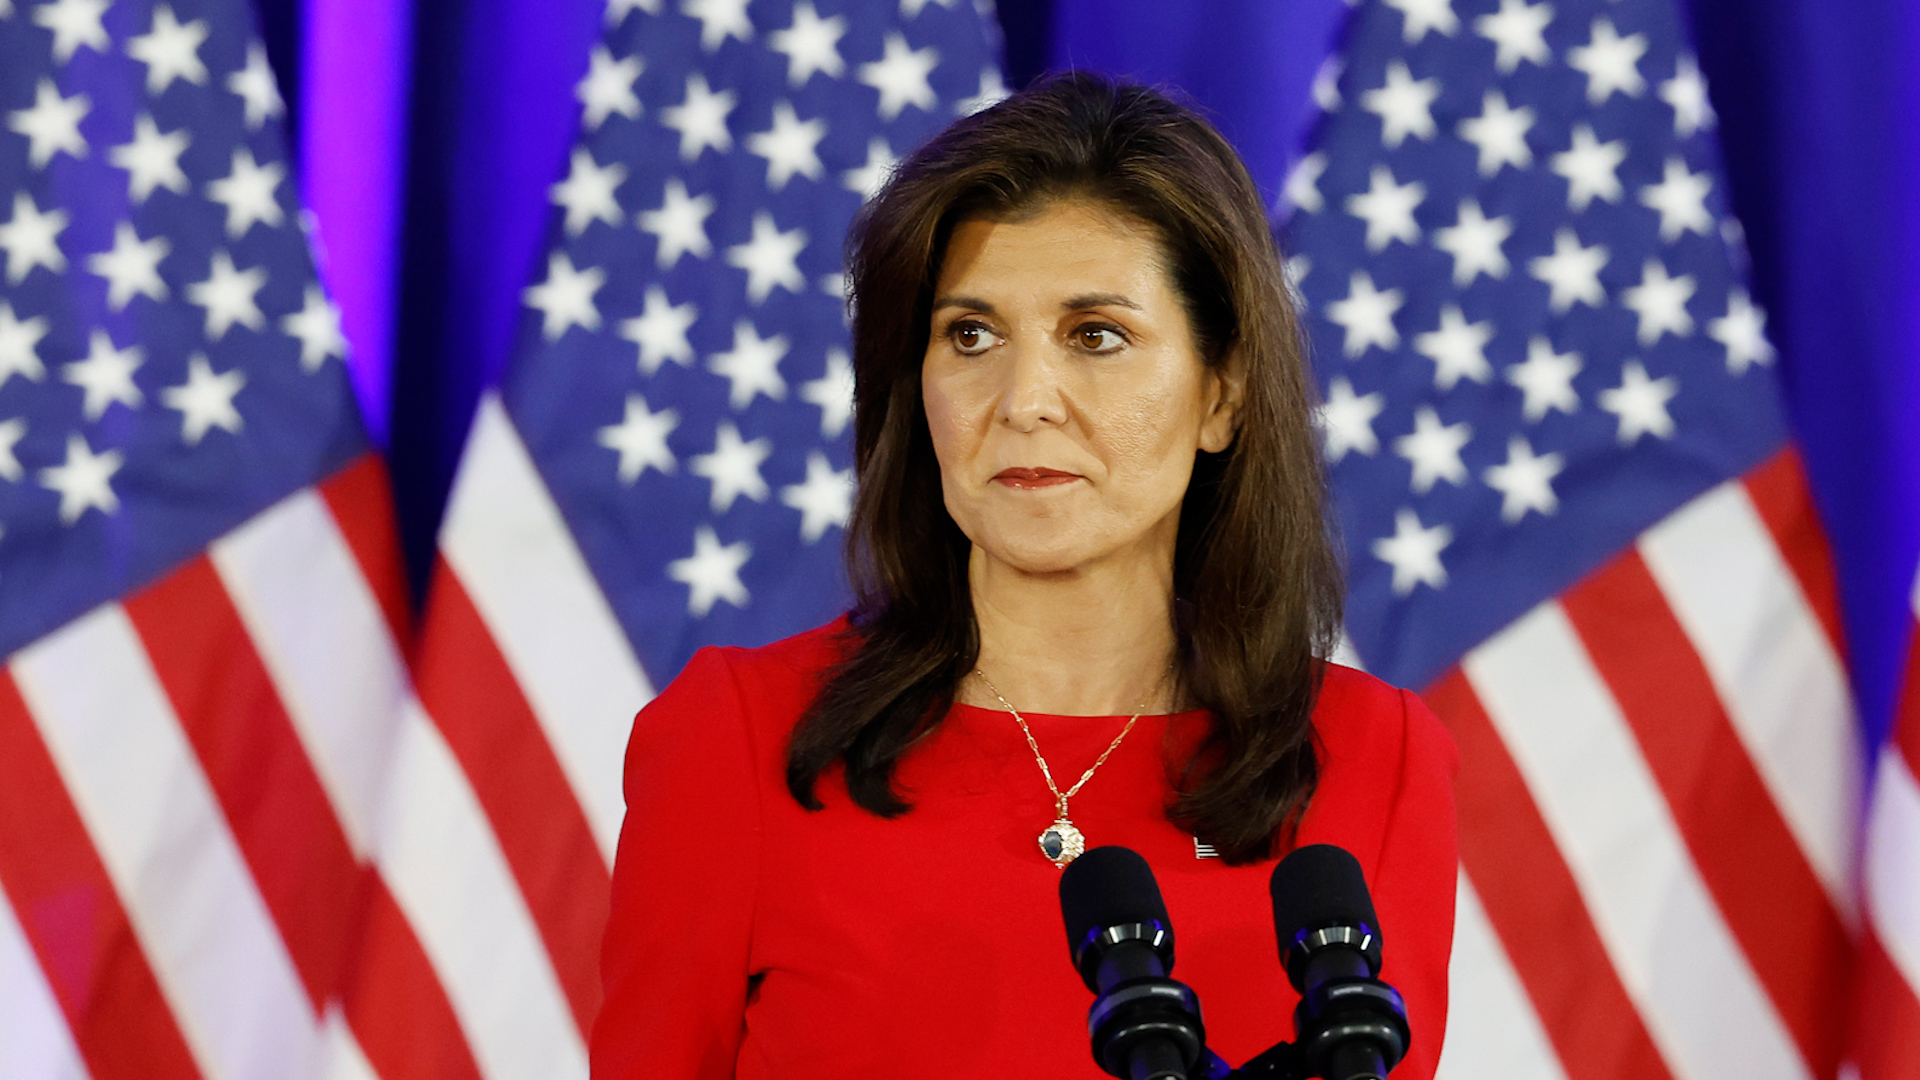 Nikki Haley suspended her 2024 presidential campaign without endorsing Donald Trump following significant Super Tuesday losses.